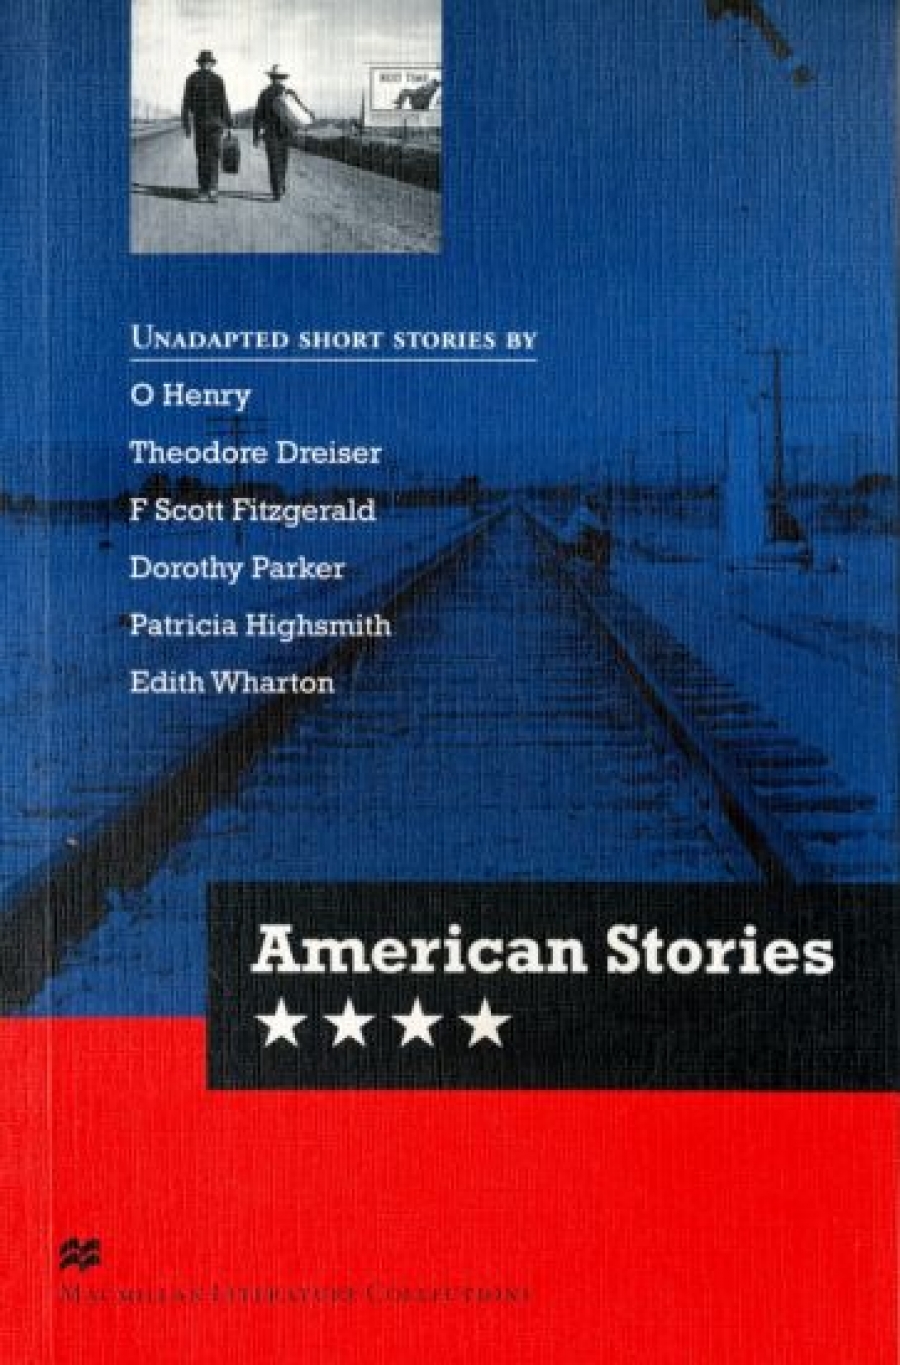 Additional material written by Lesley Thompson and Ceri Jones American Stories 